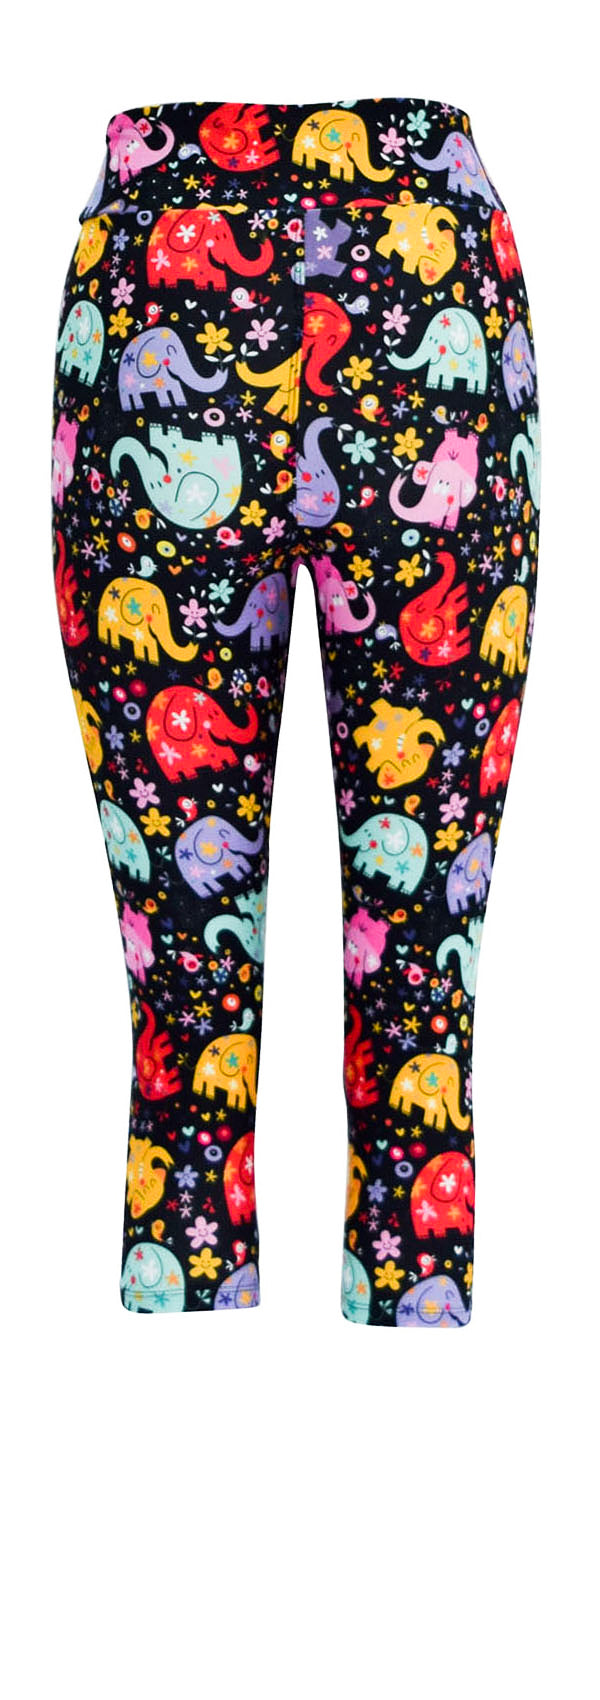 Nelly The Elephant-Adult Leggings